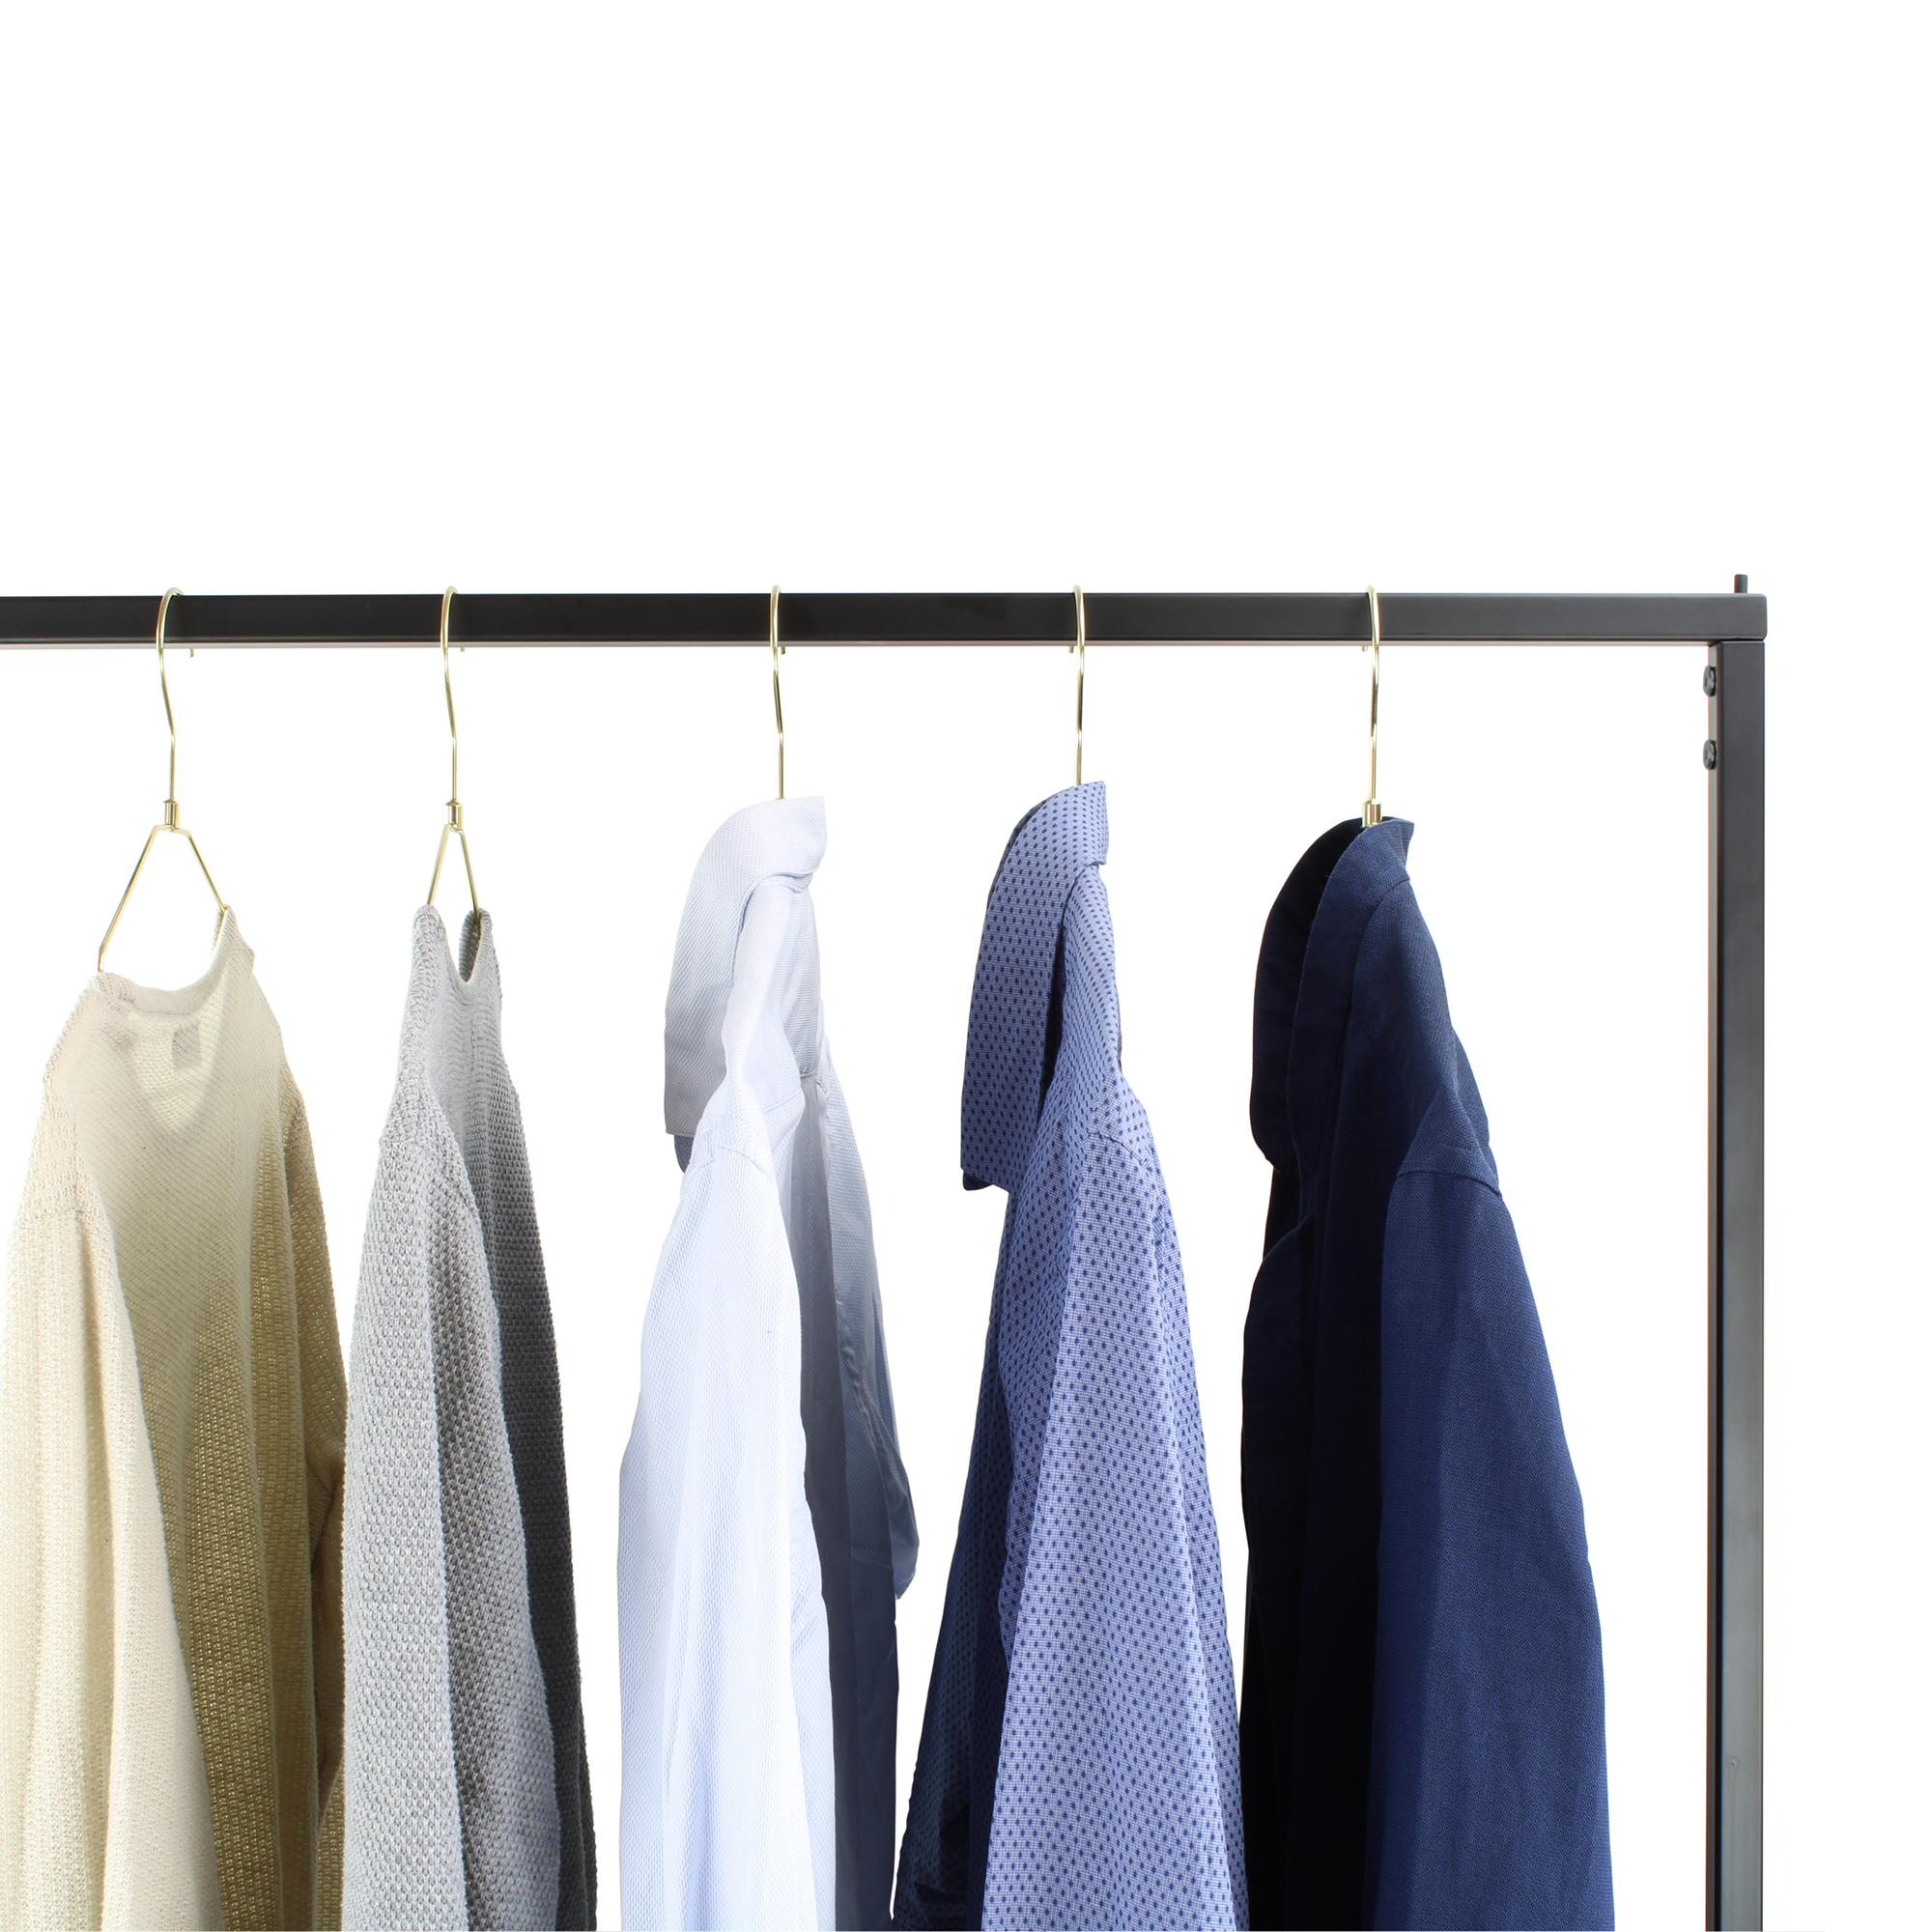 Copy of clothes rack BASIS